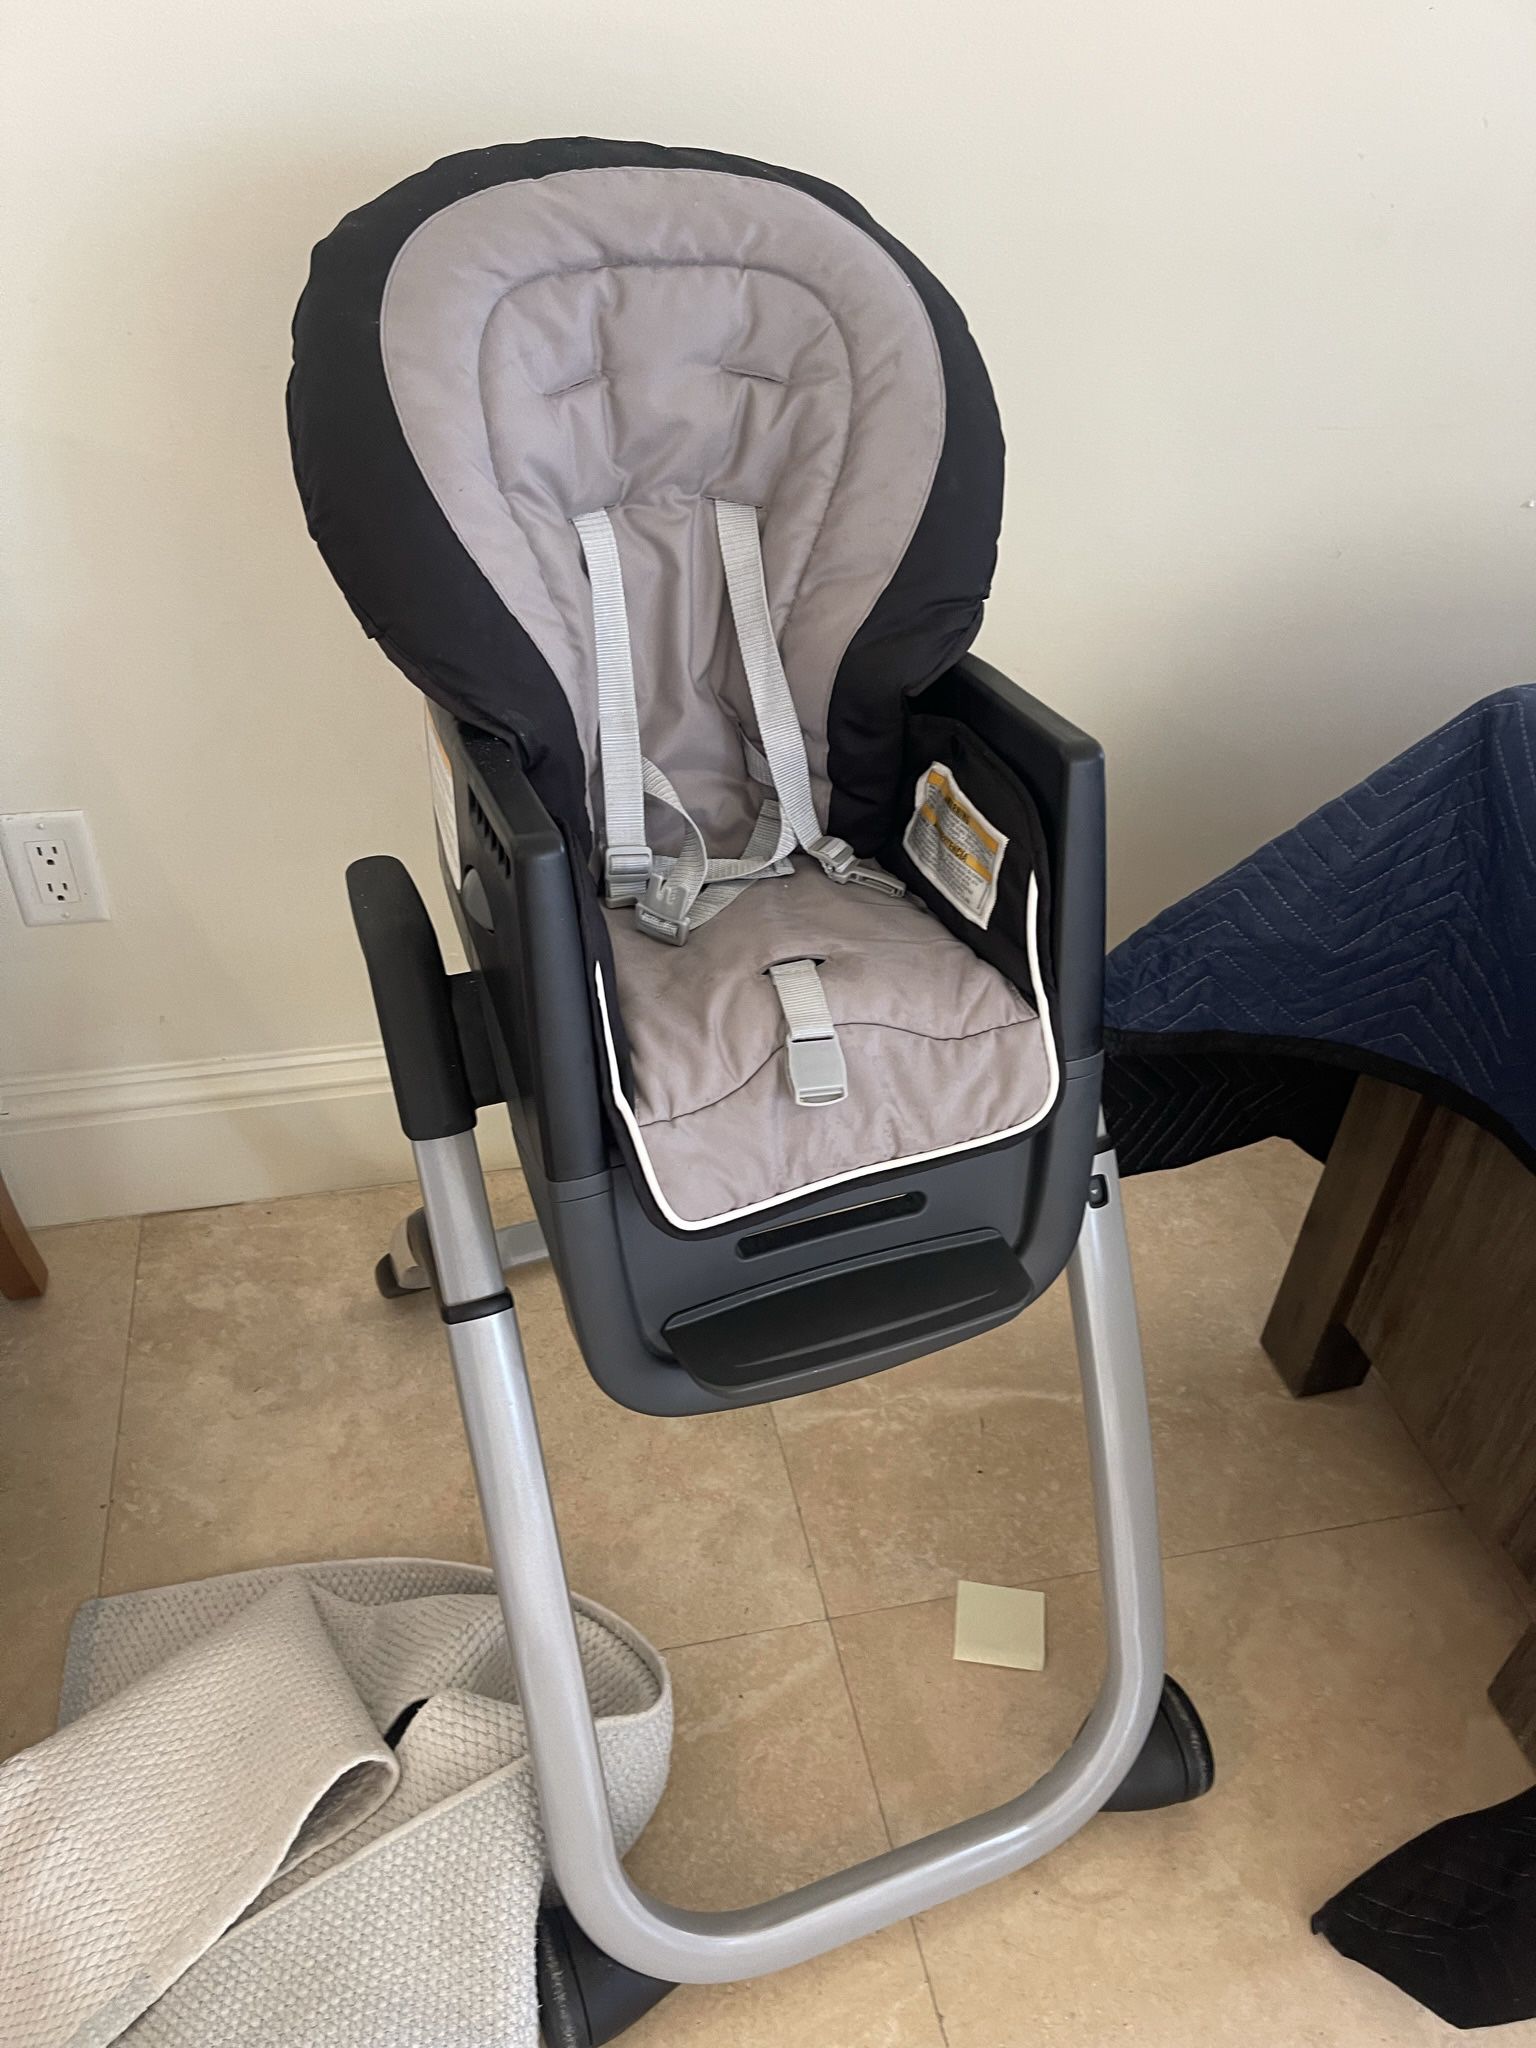 High Chair - No Tray - $10